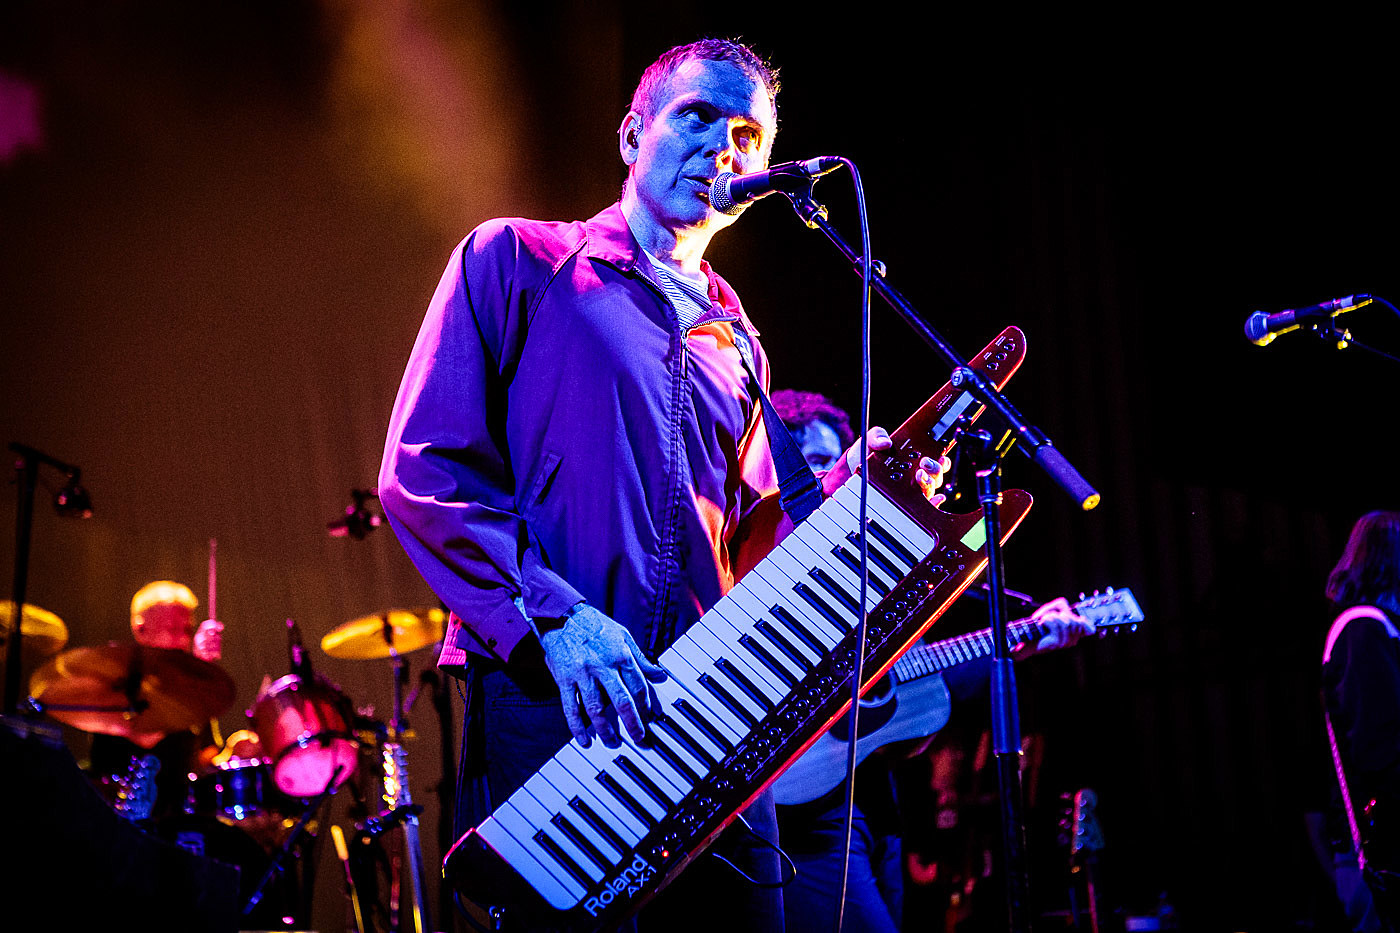 Belle and Sebastian w/ Snail Mail at College St Music Hall